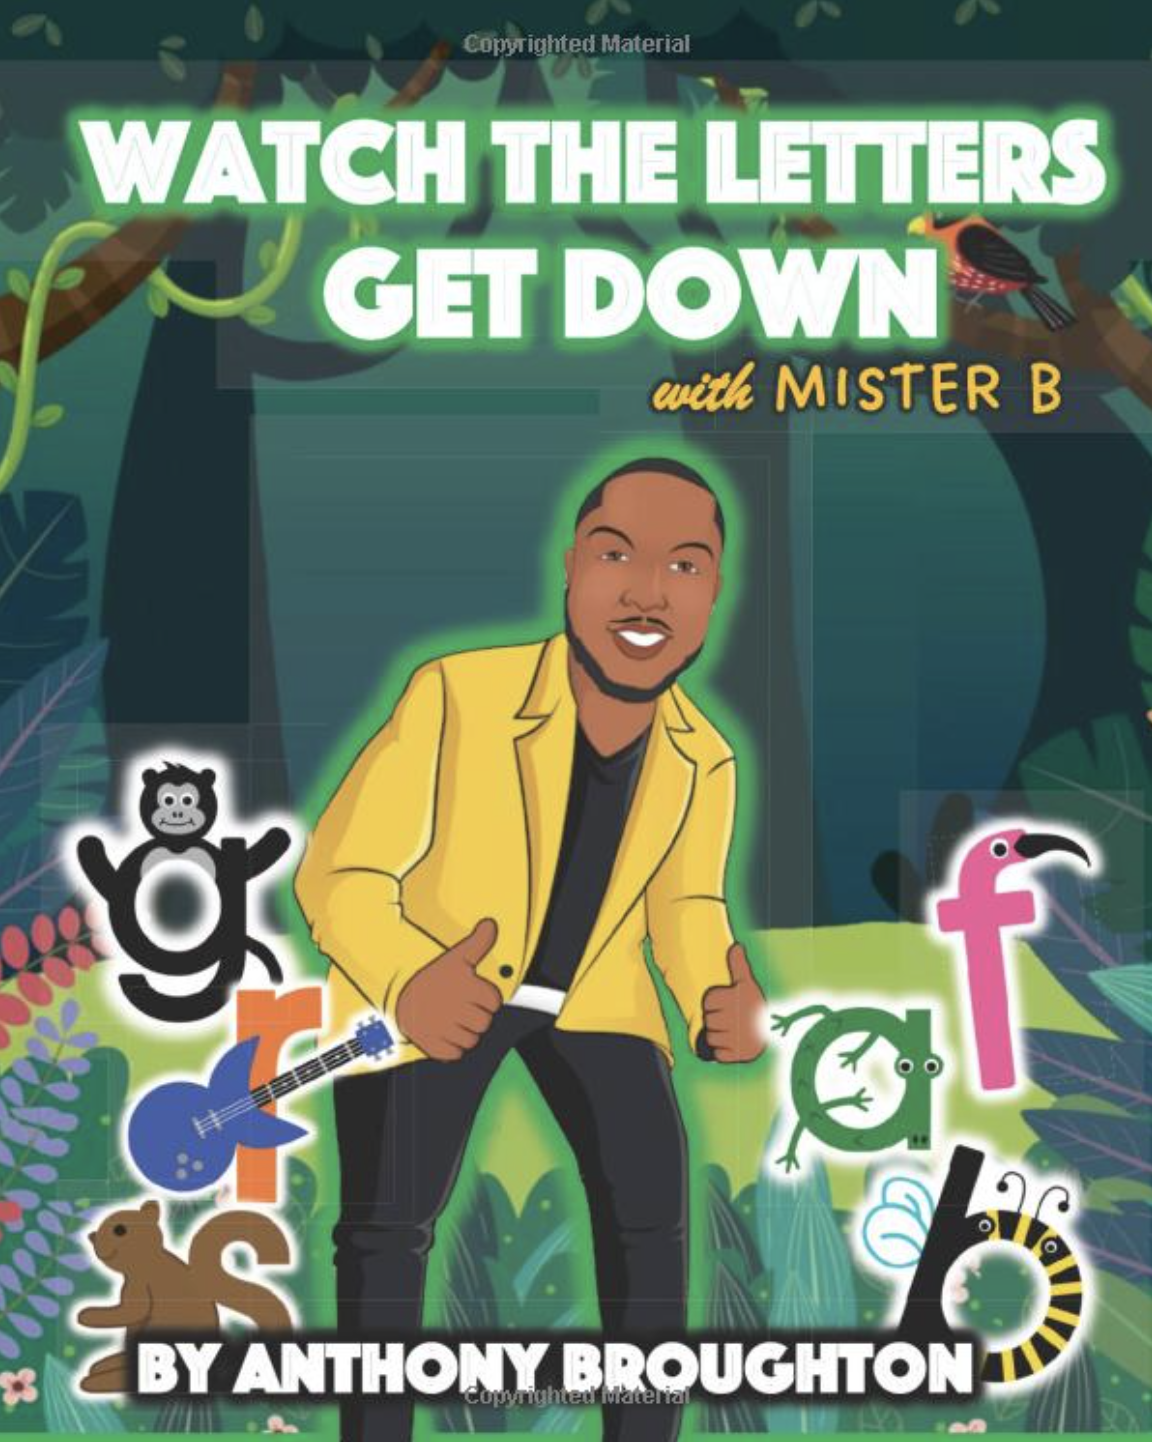 Watch the Letters Get Down with MISTER B